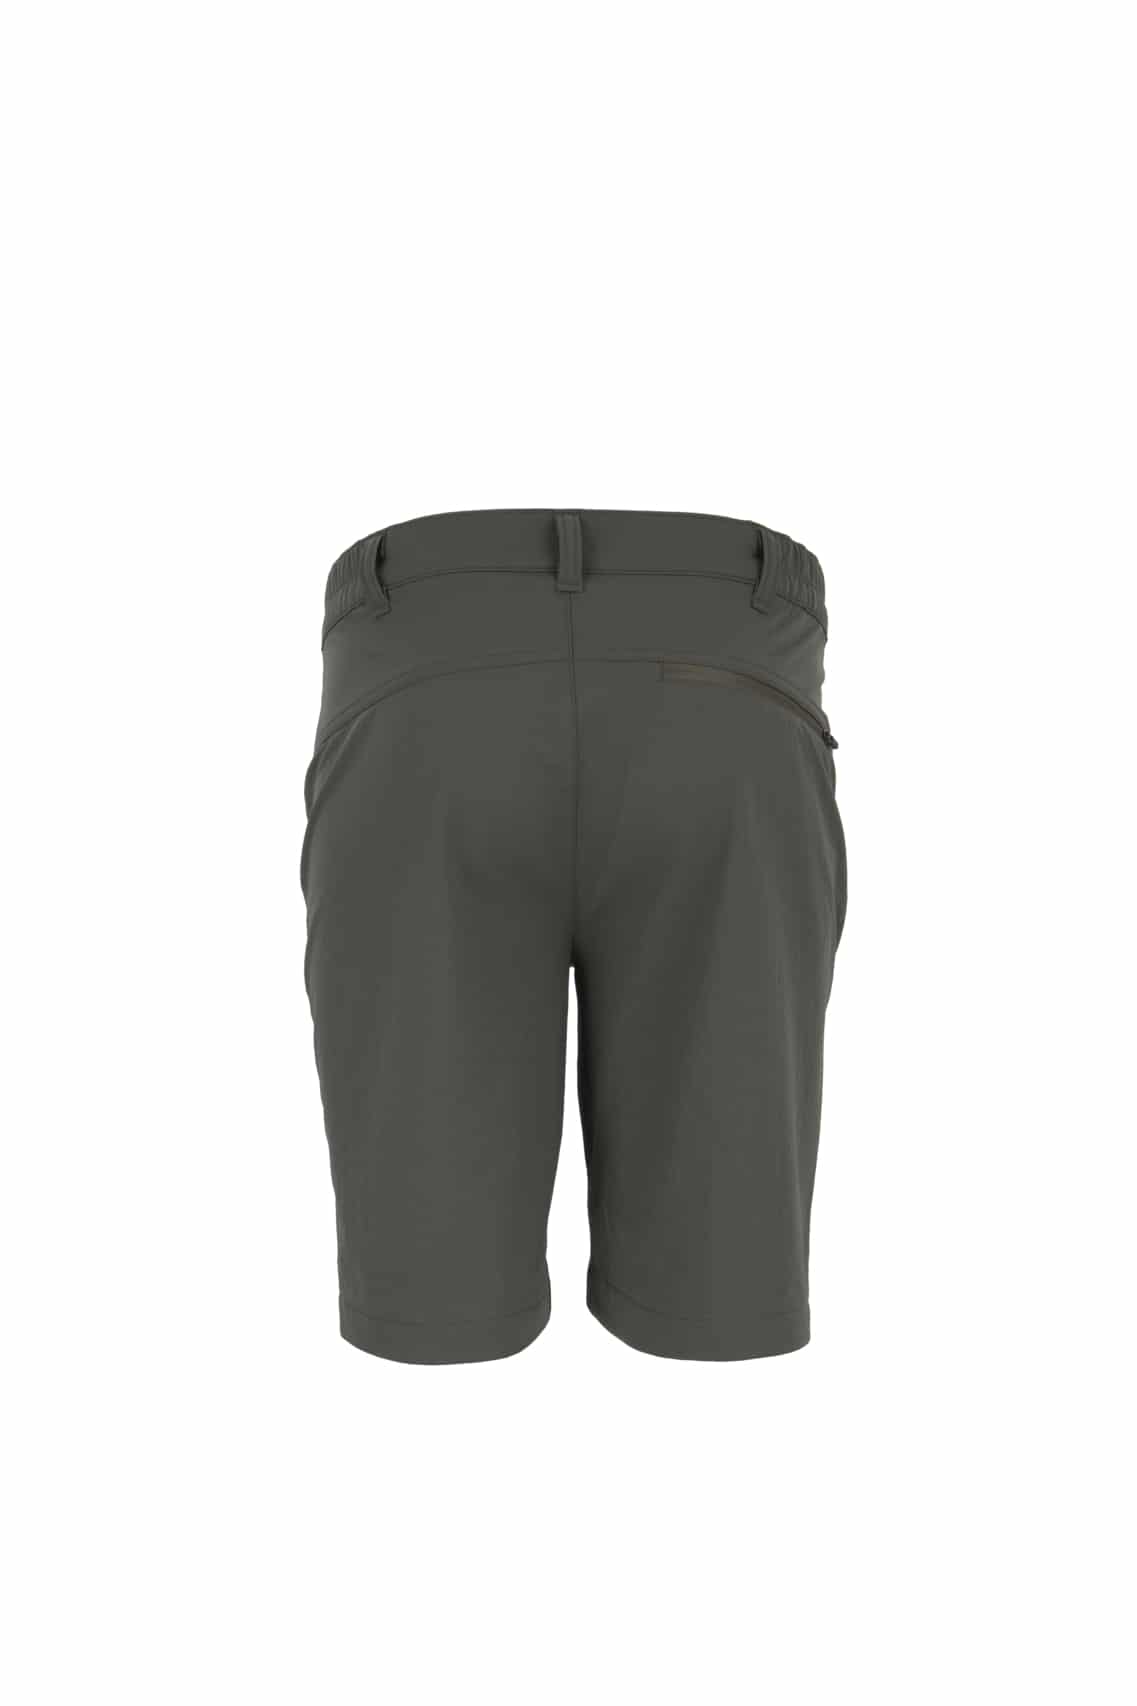 photo of Silverpoint mens ennerdale shorts olive rear